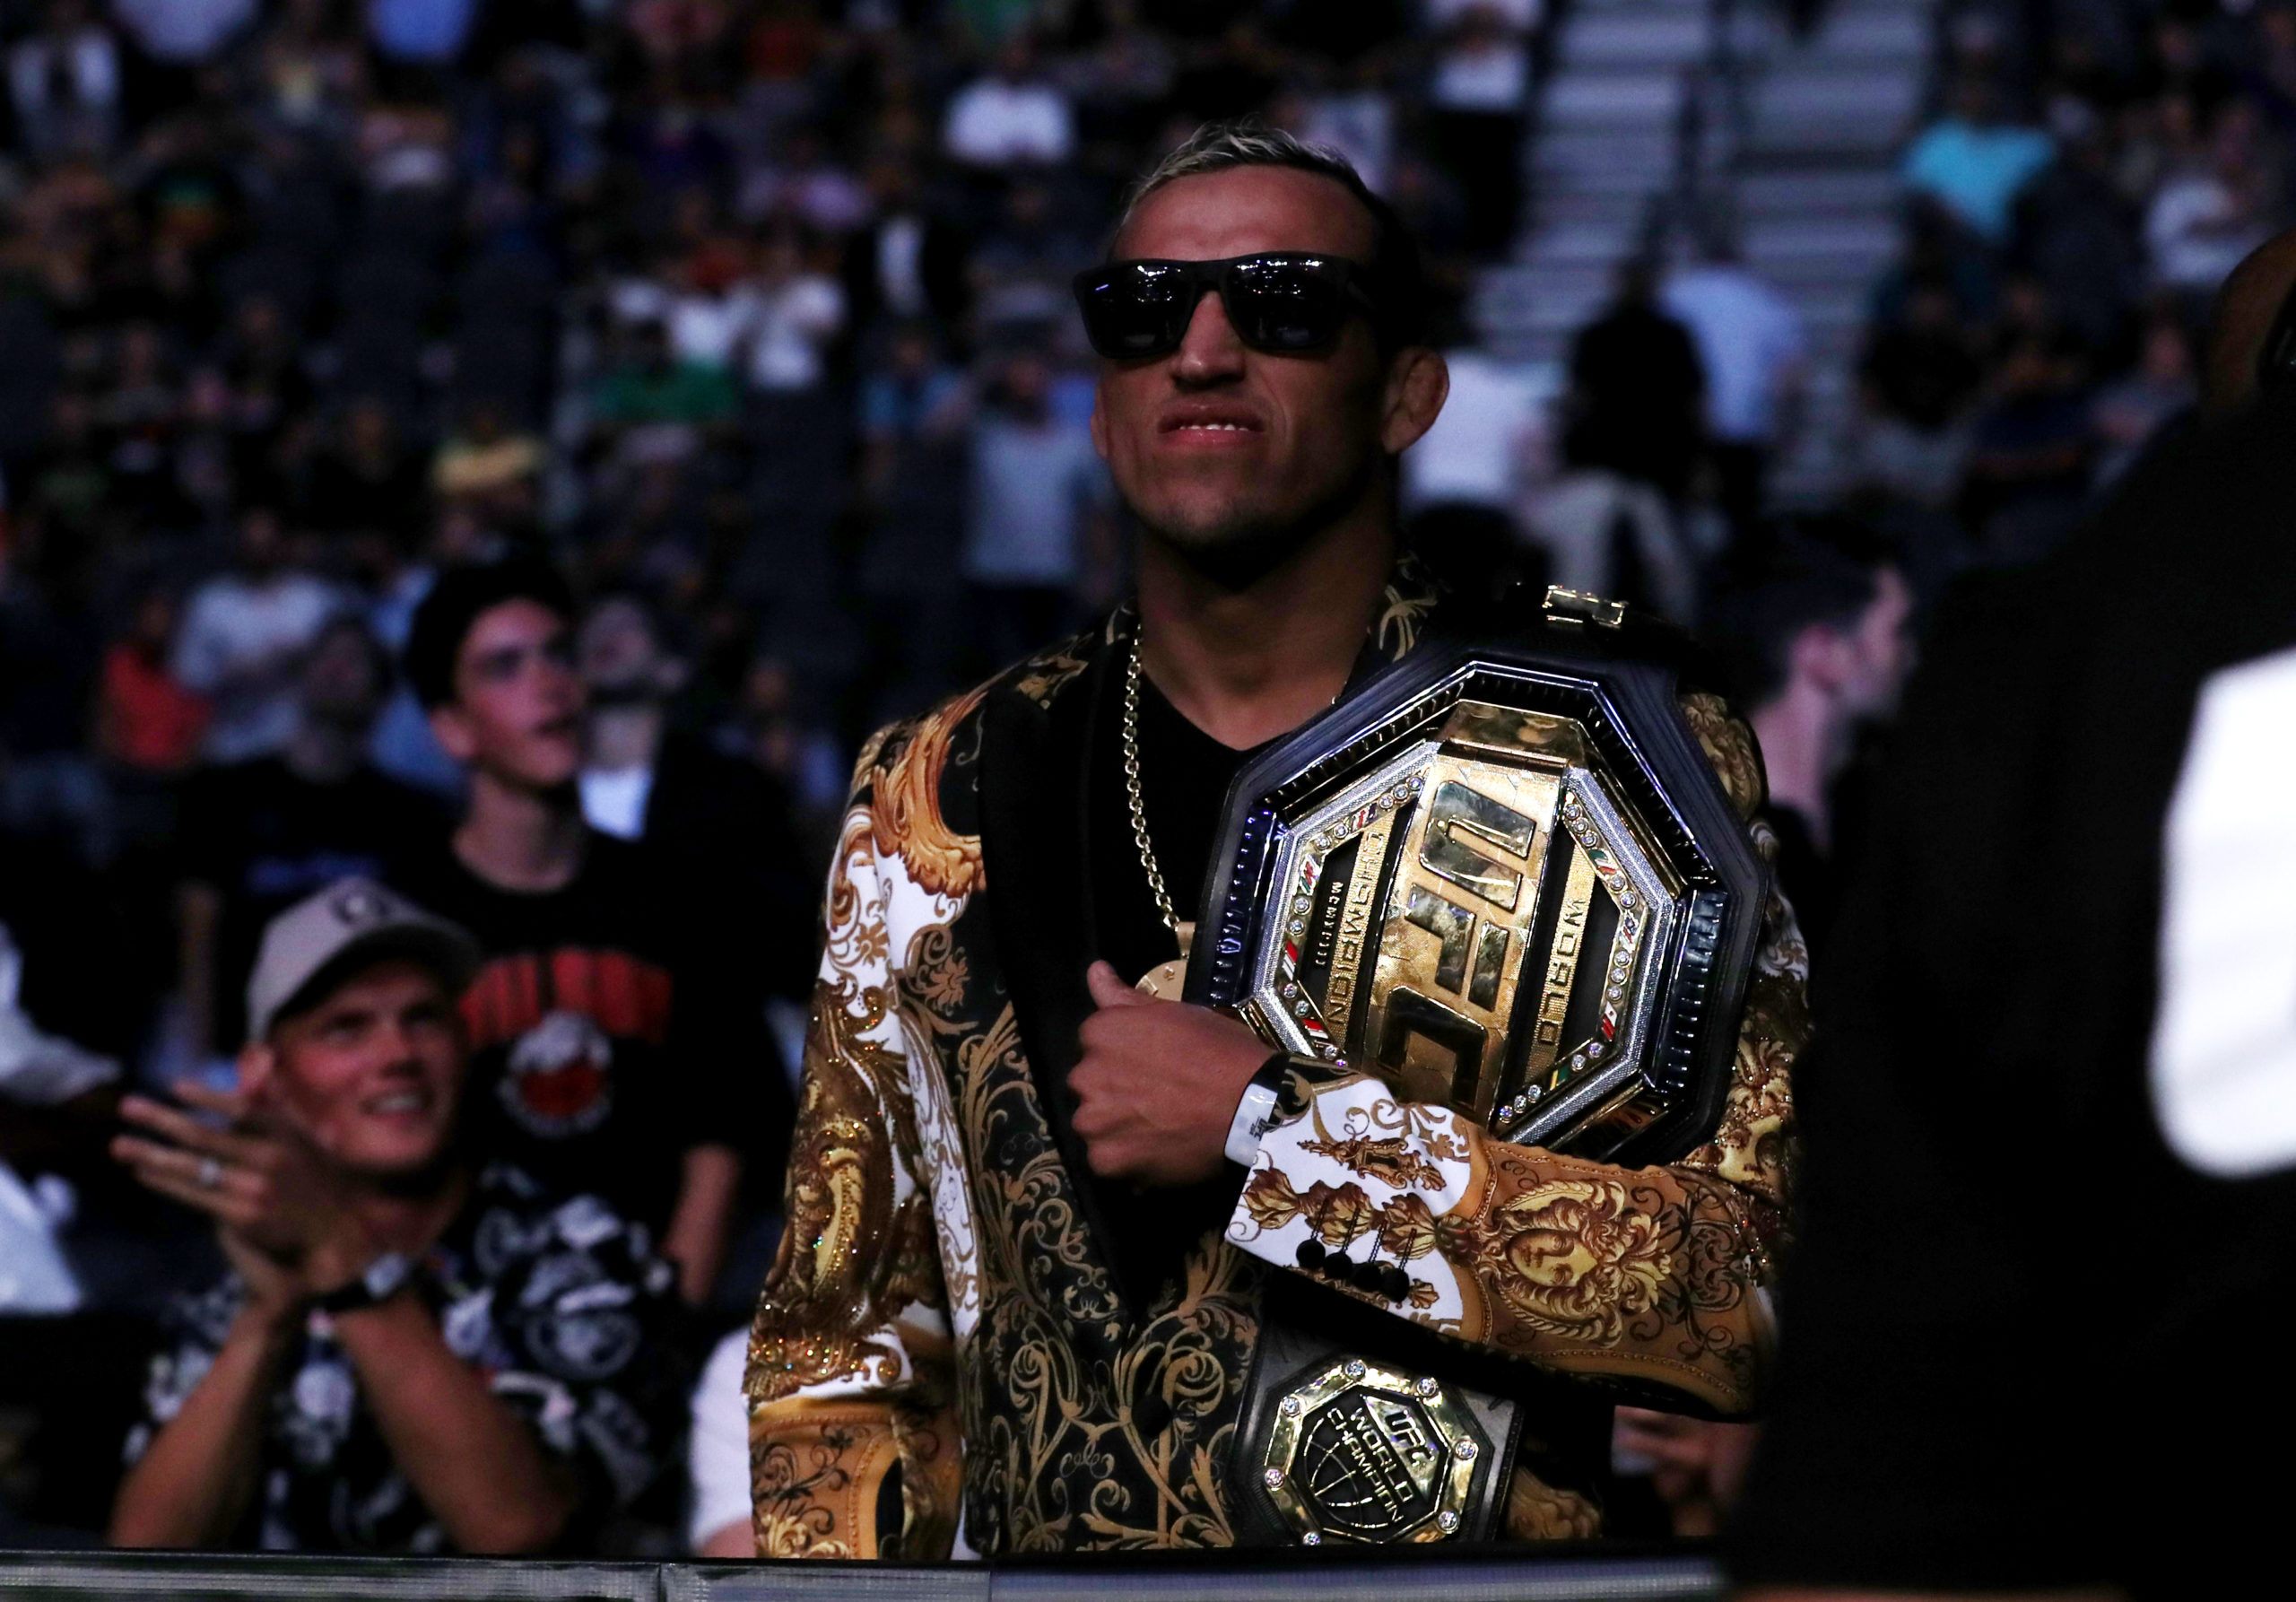 FILE PHOTO: MMA - UFC264 - Dustin Poirier v Conor McGregor - T-Mobile Arena, Las Vegas, US - July 10, 2021 UFC Lightweight Champion Charles Oliveira is seen before the main event 